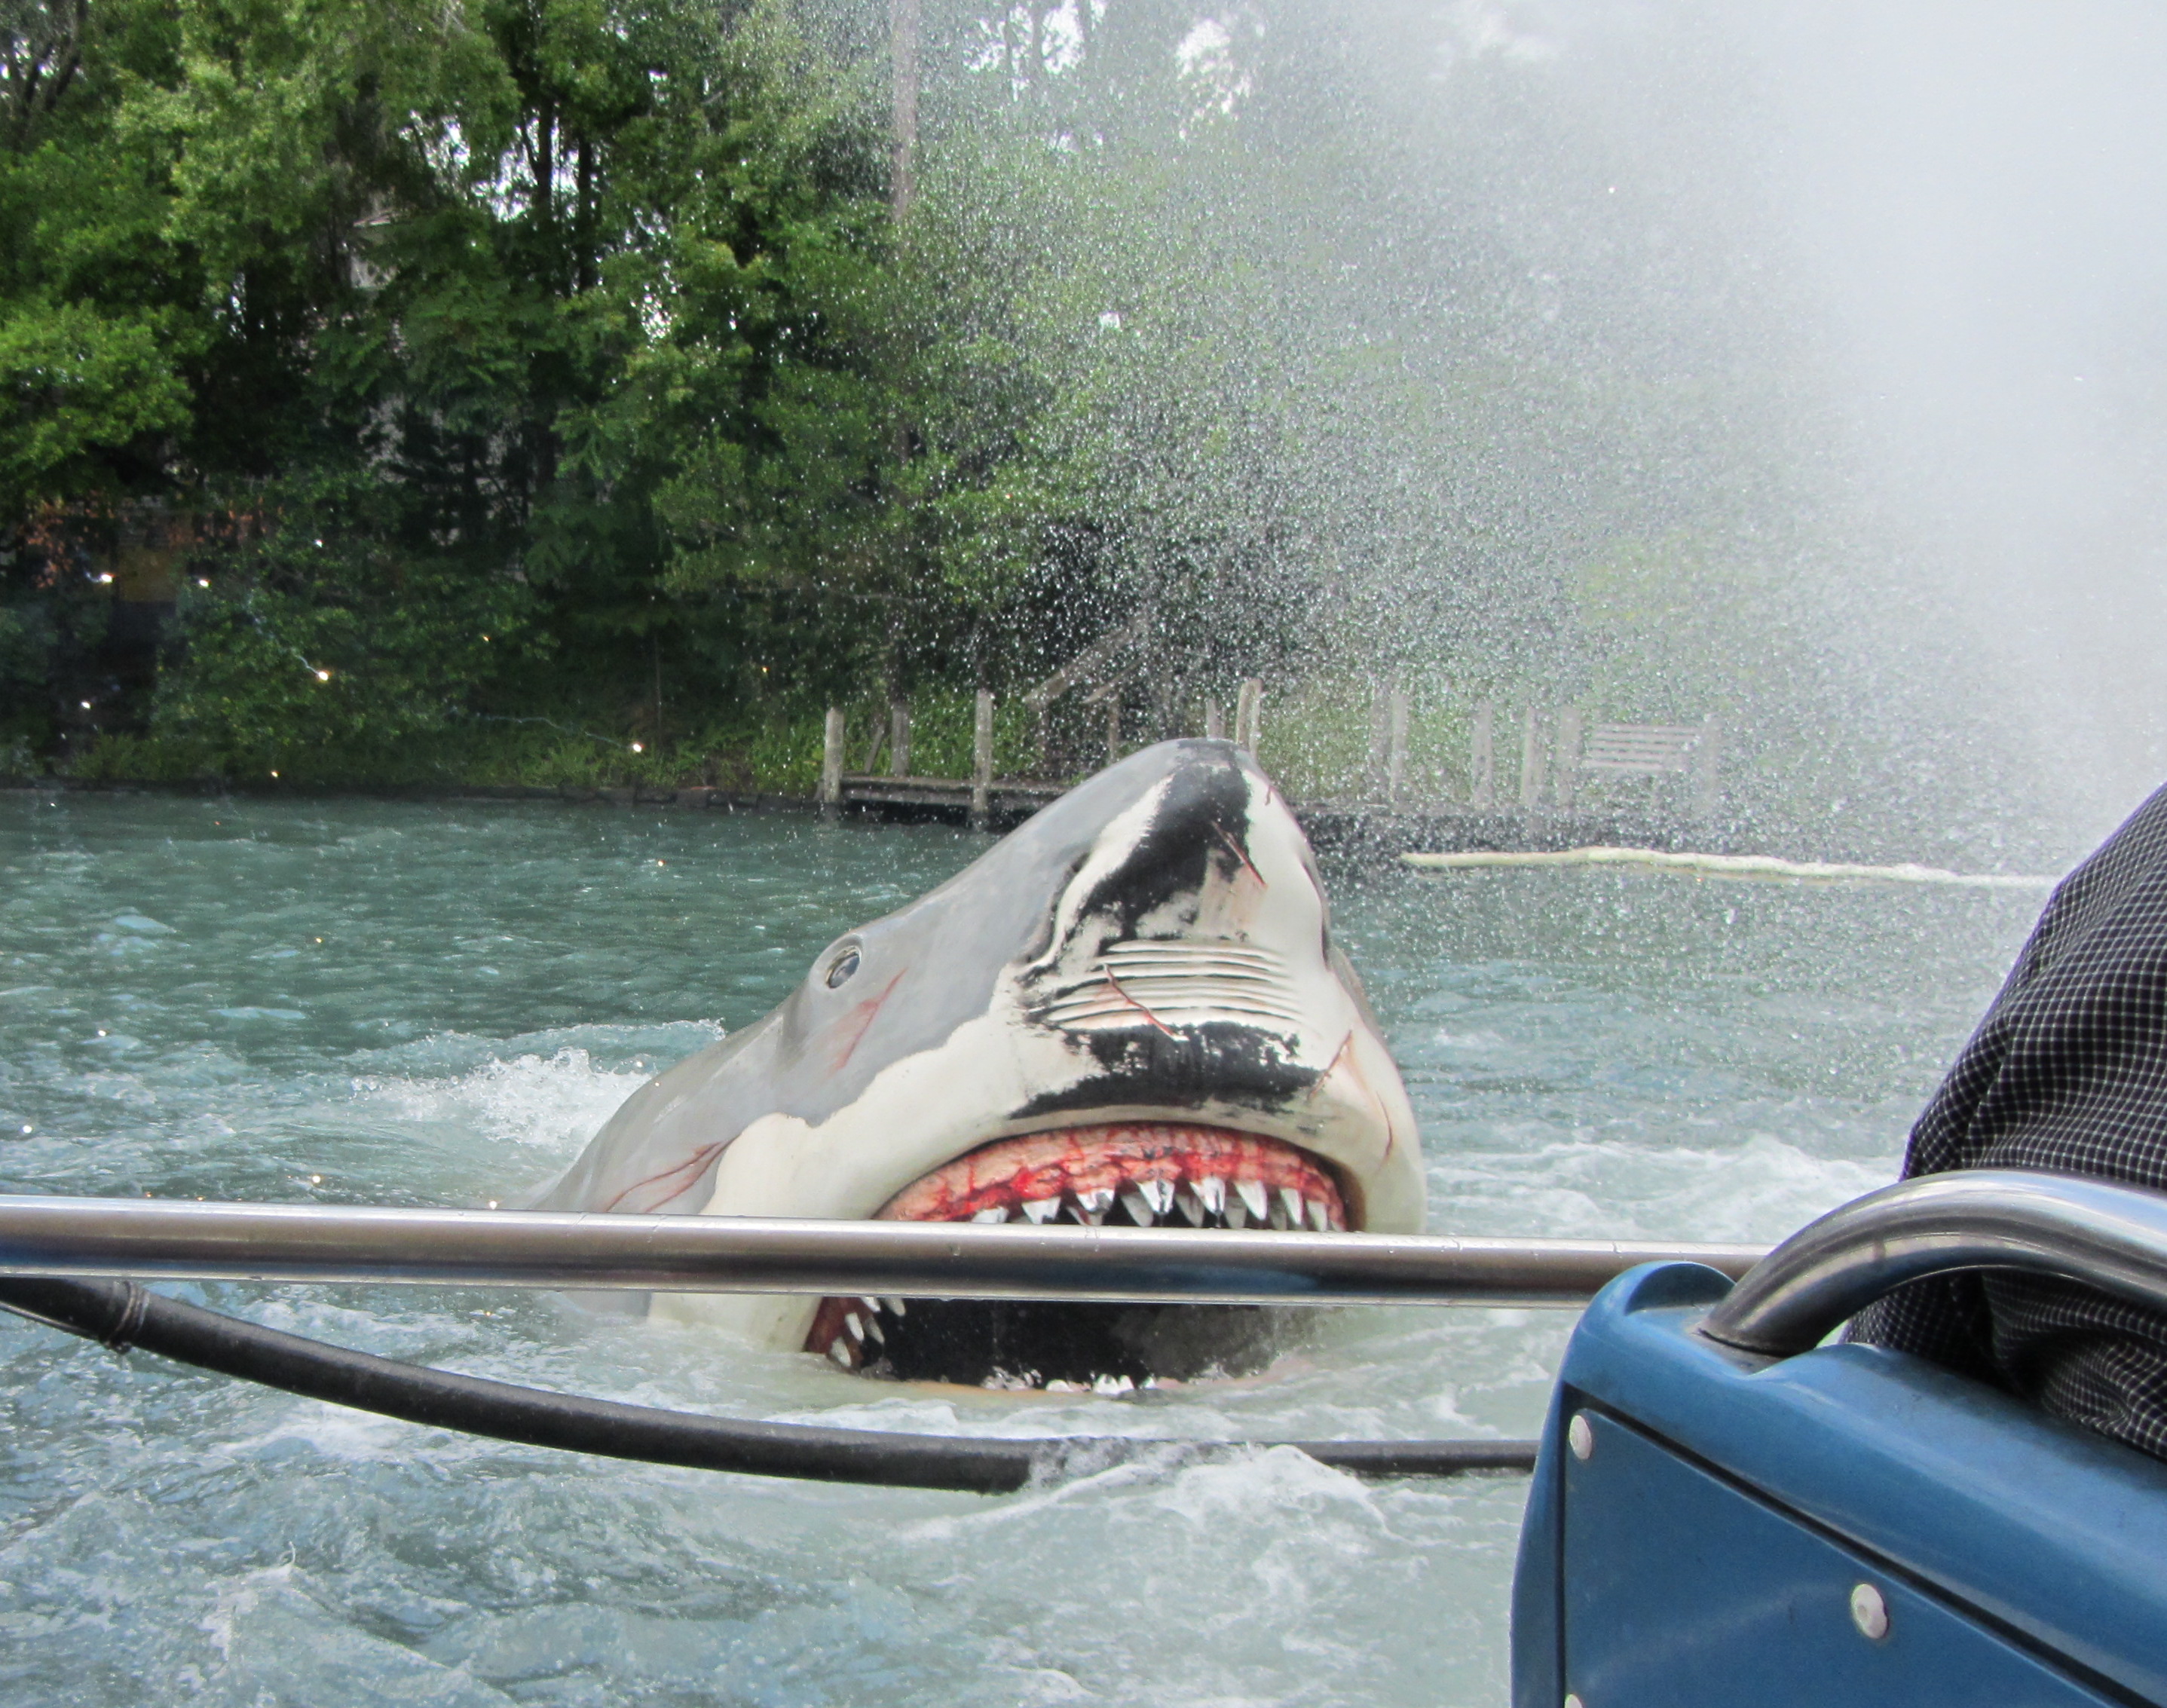 Jaws Ride: The Movie - An ultimate tribute as Universal Studios